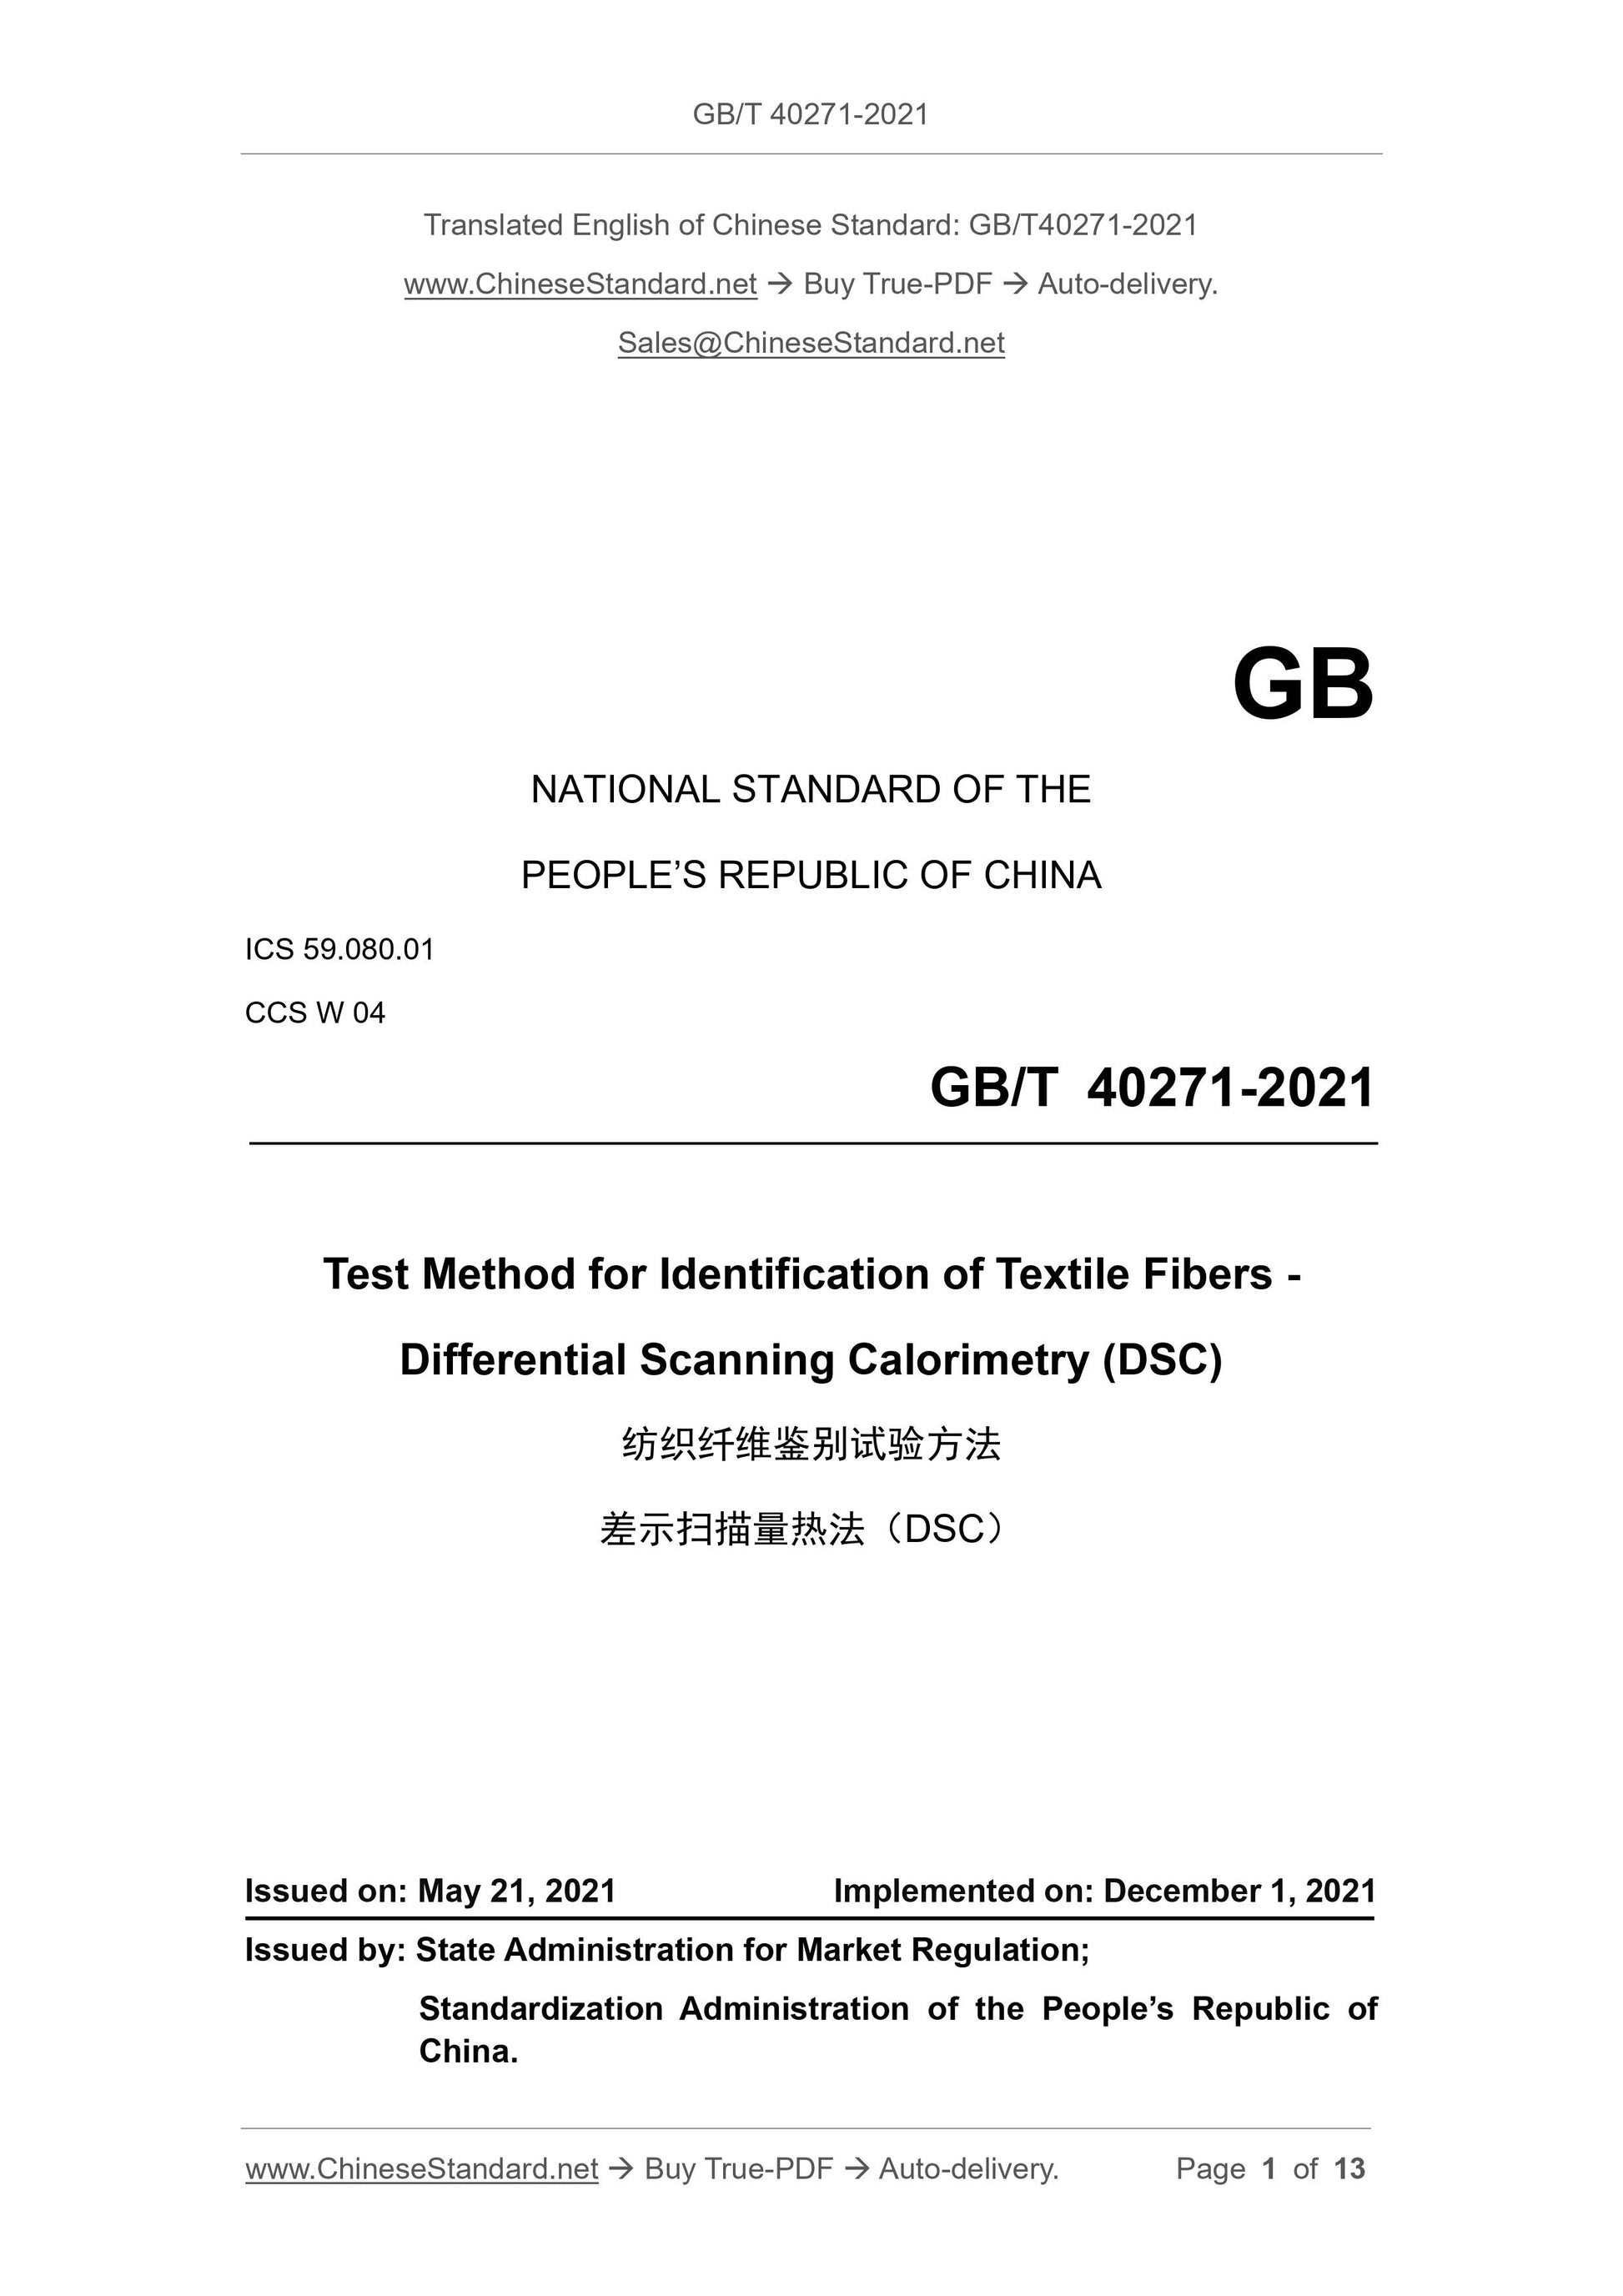 GB/T 40271-2021 Page 1